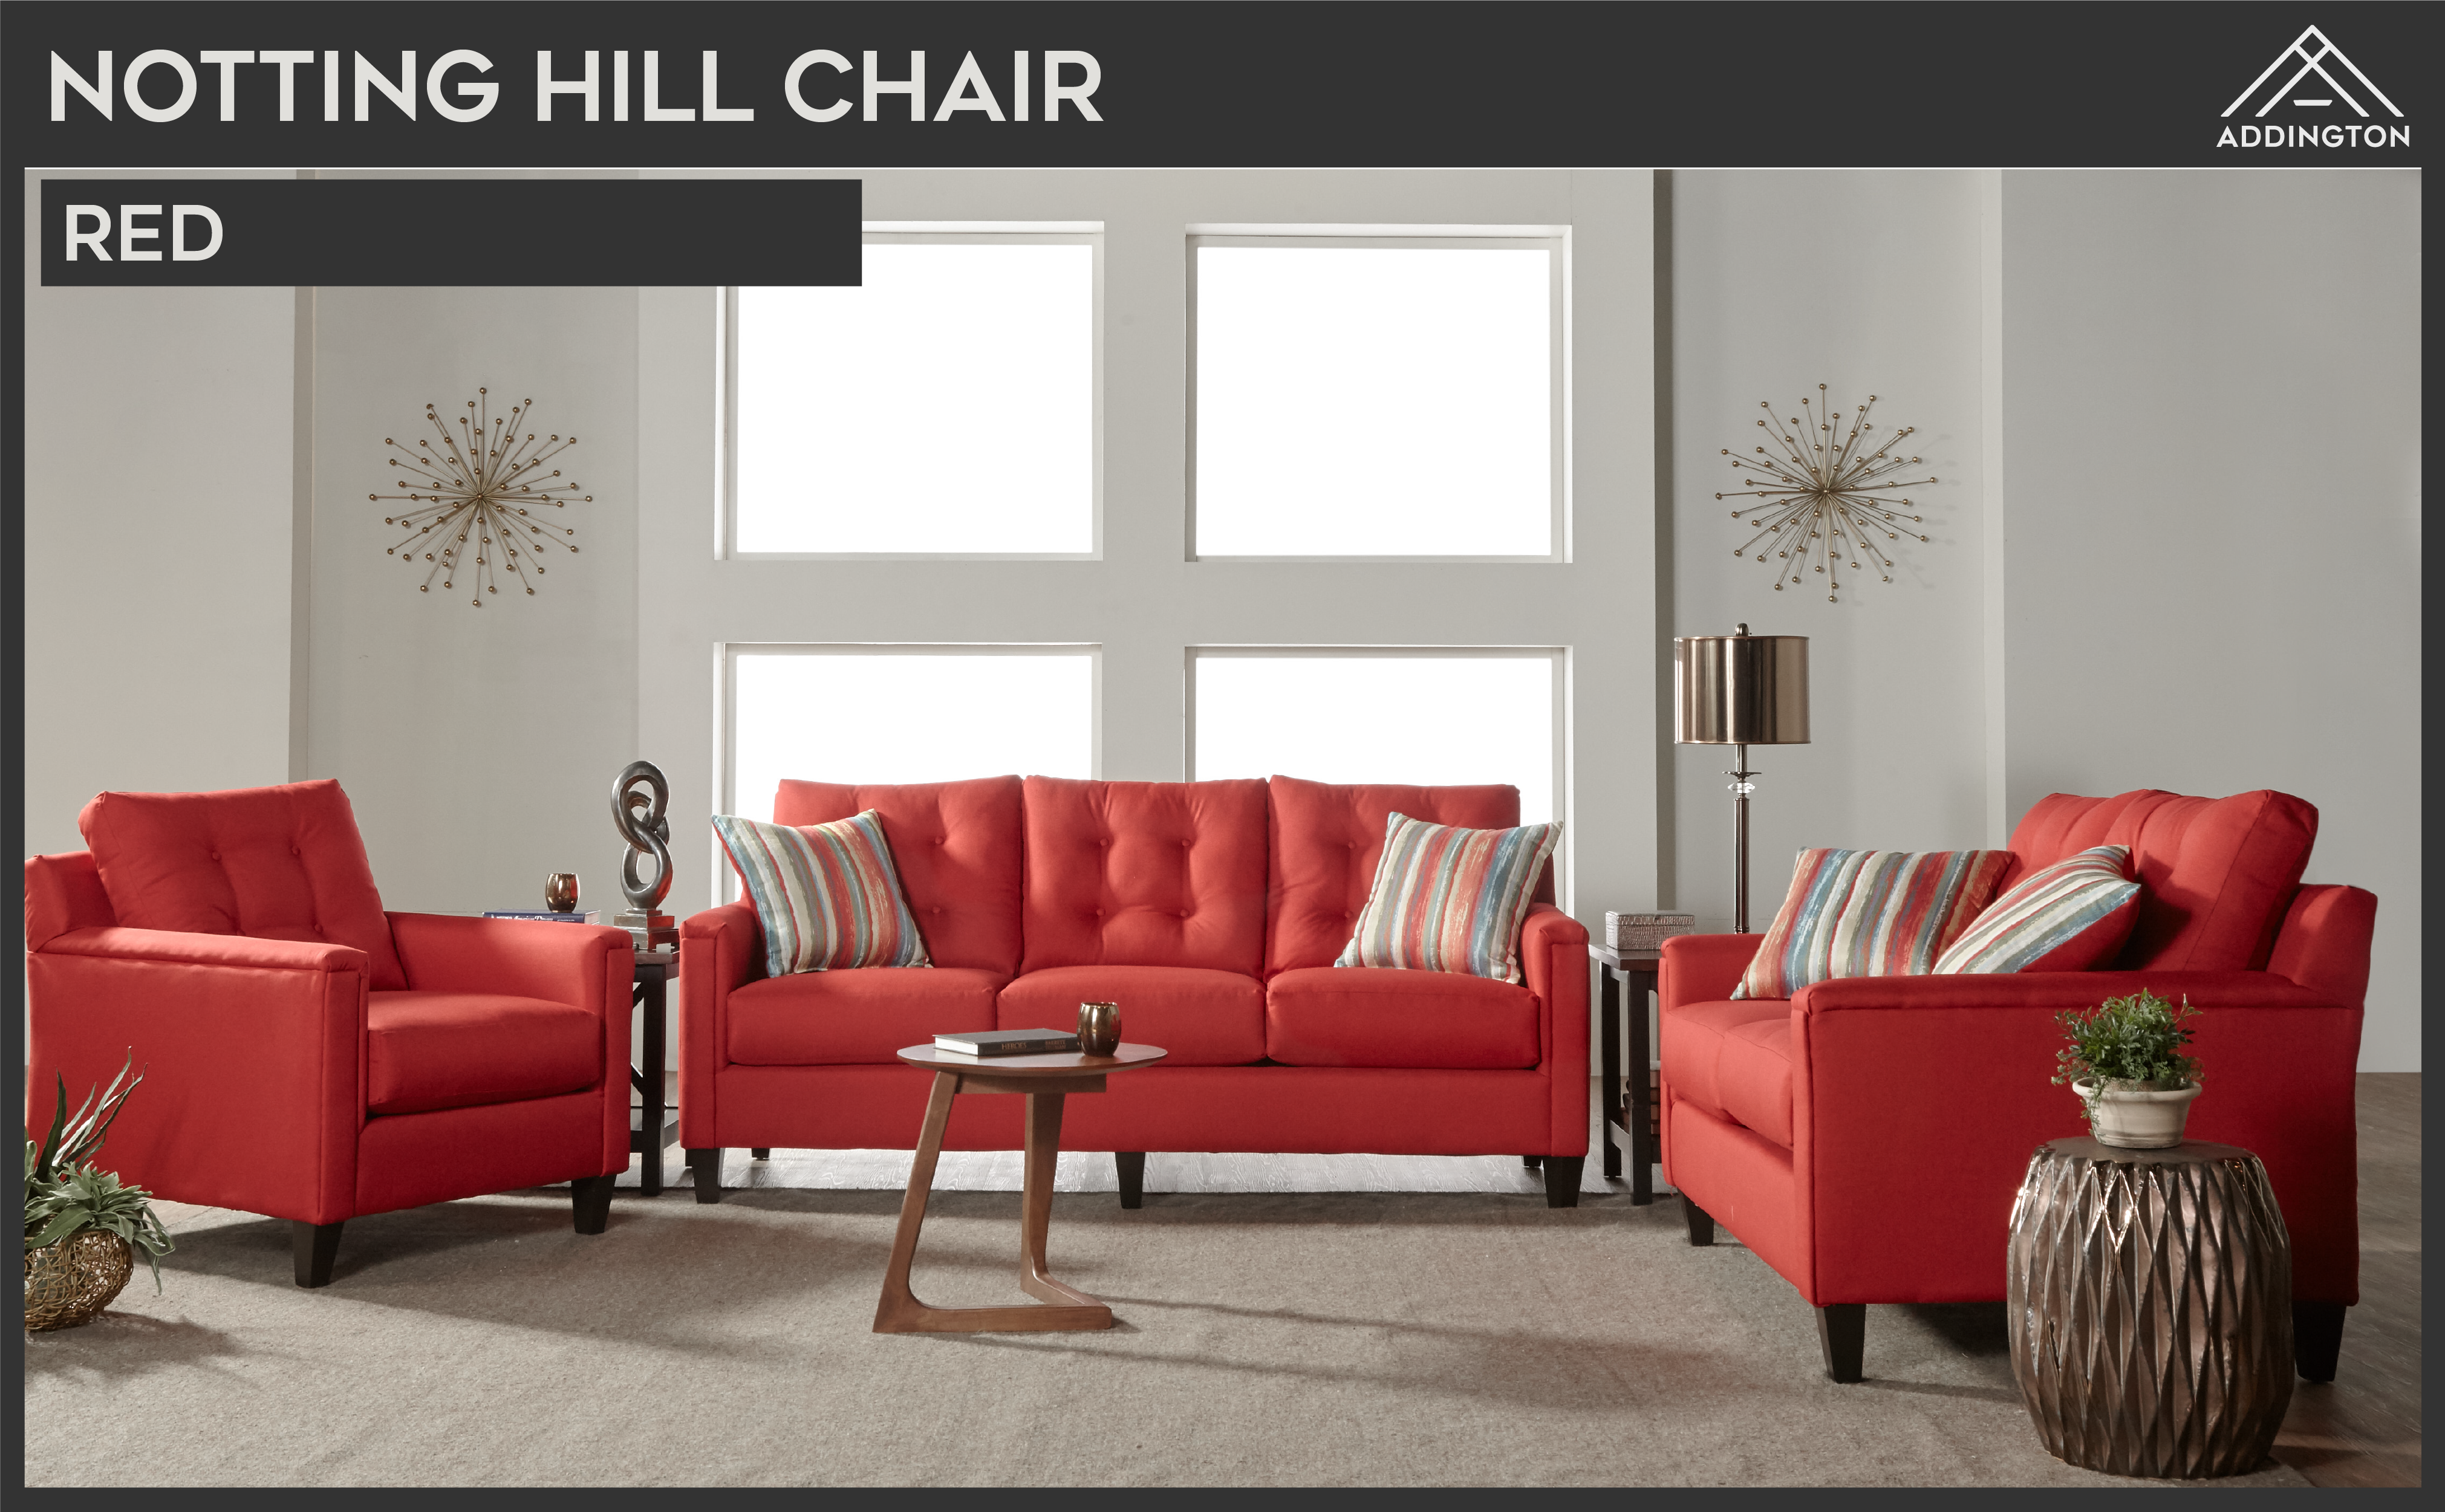 notting hill chair red lifestyle.png__PID:7bfb54c9-d74d-4360-932c-4162fffab695